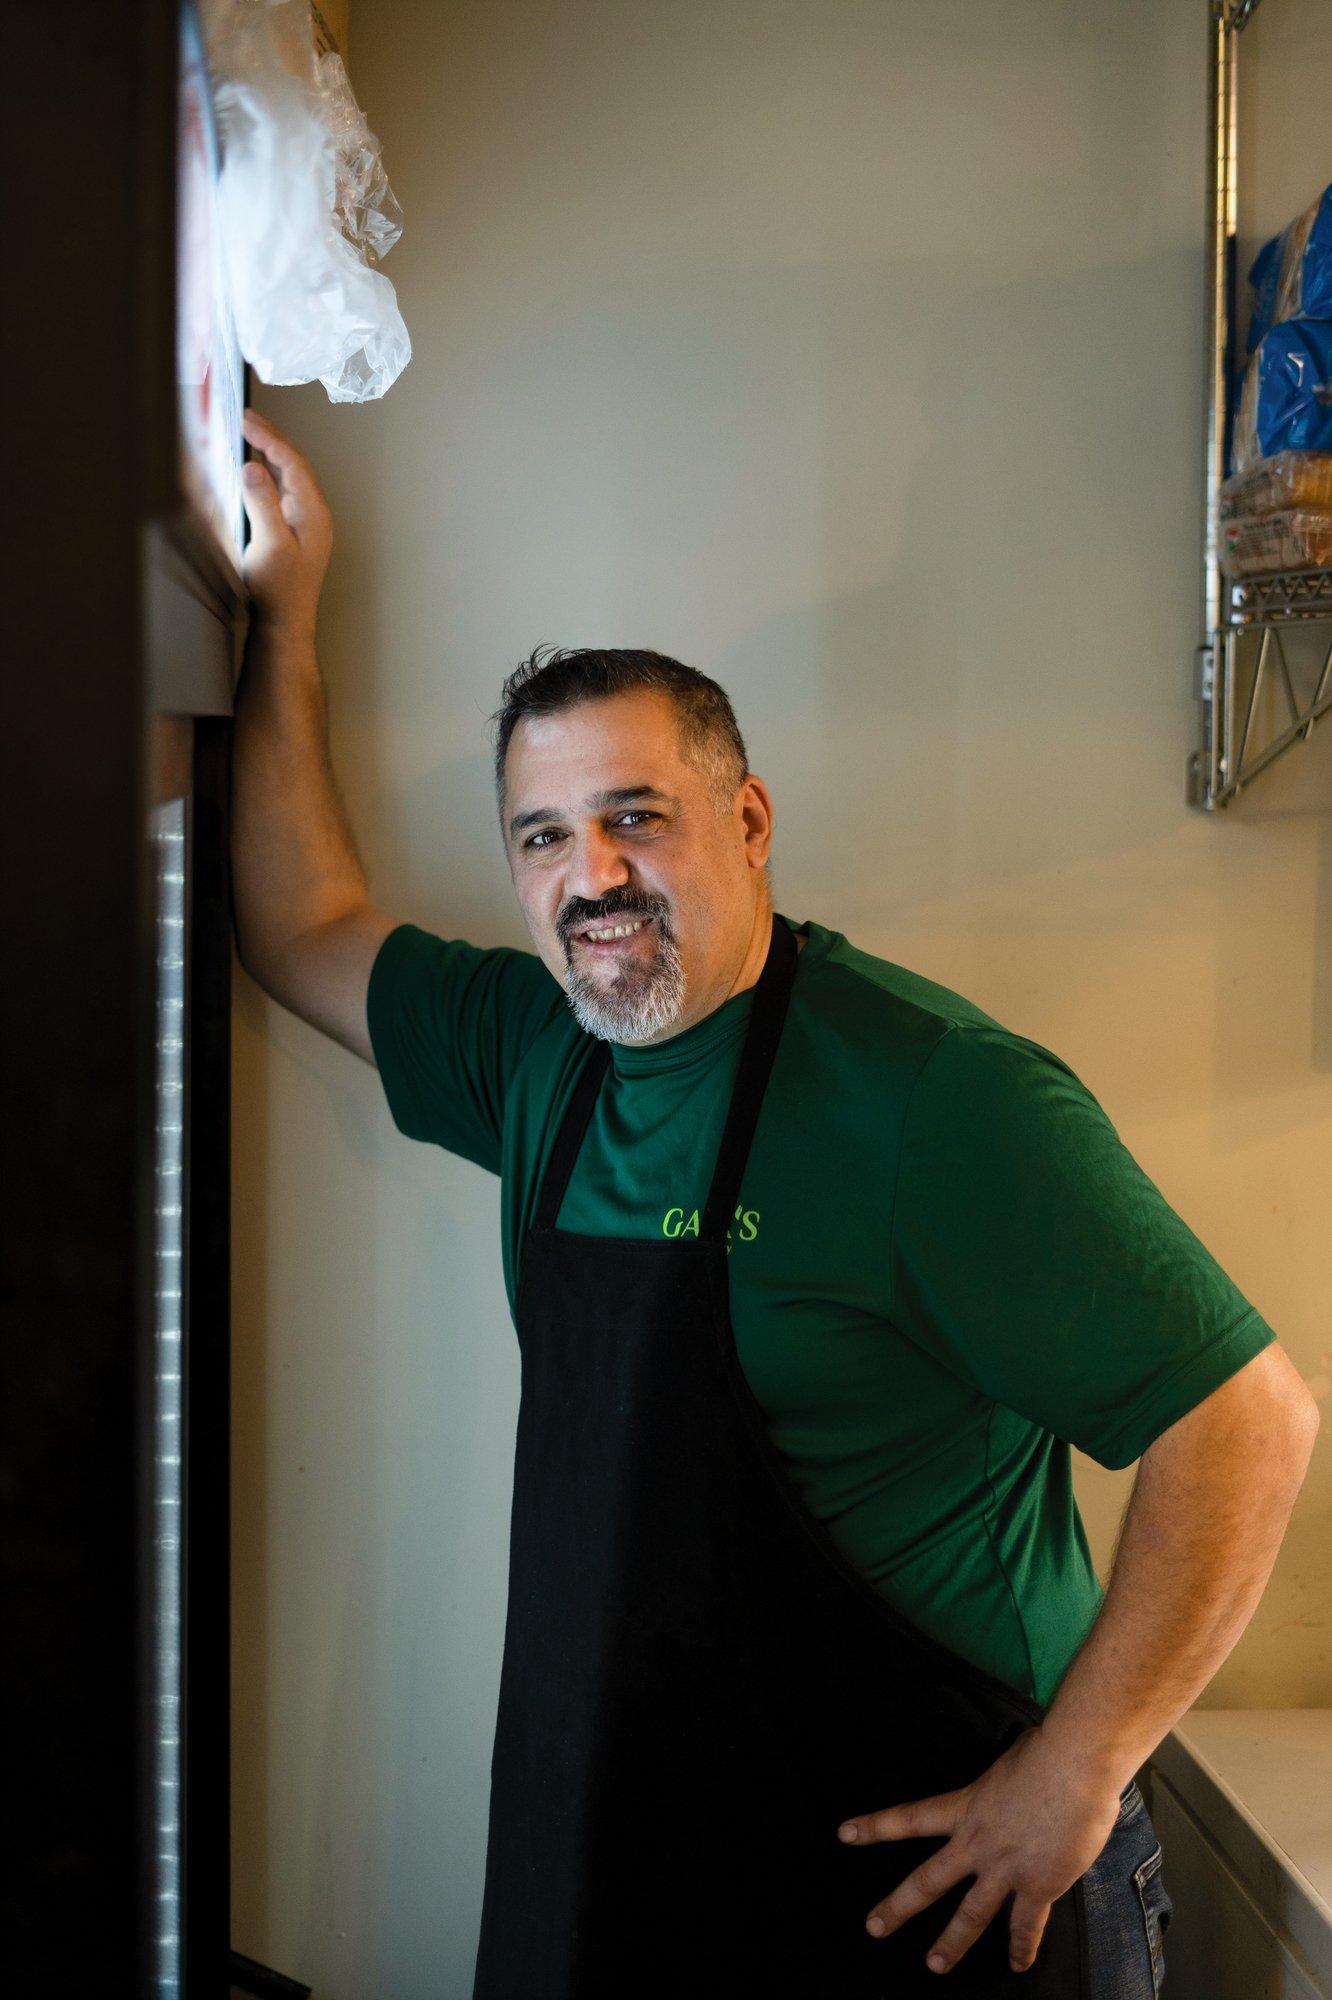 When Lebanon-born chef Pierre El-Hajjar moved to Charlottetown in 2011, his neighbours wouldn't even taste his food; today he runs a successful vegan restaurant